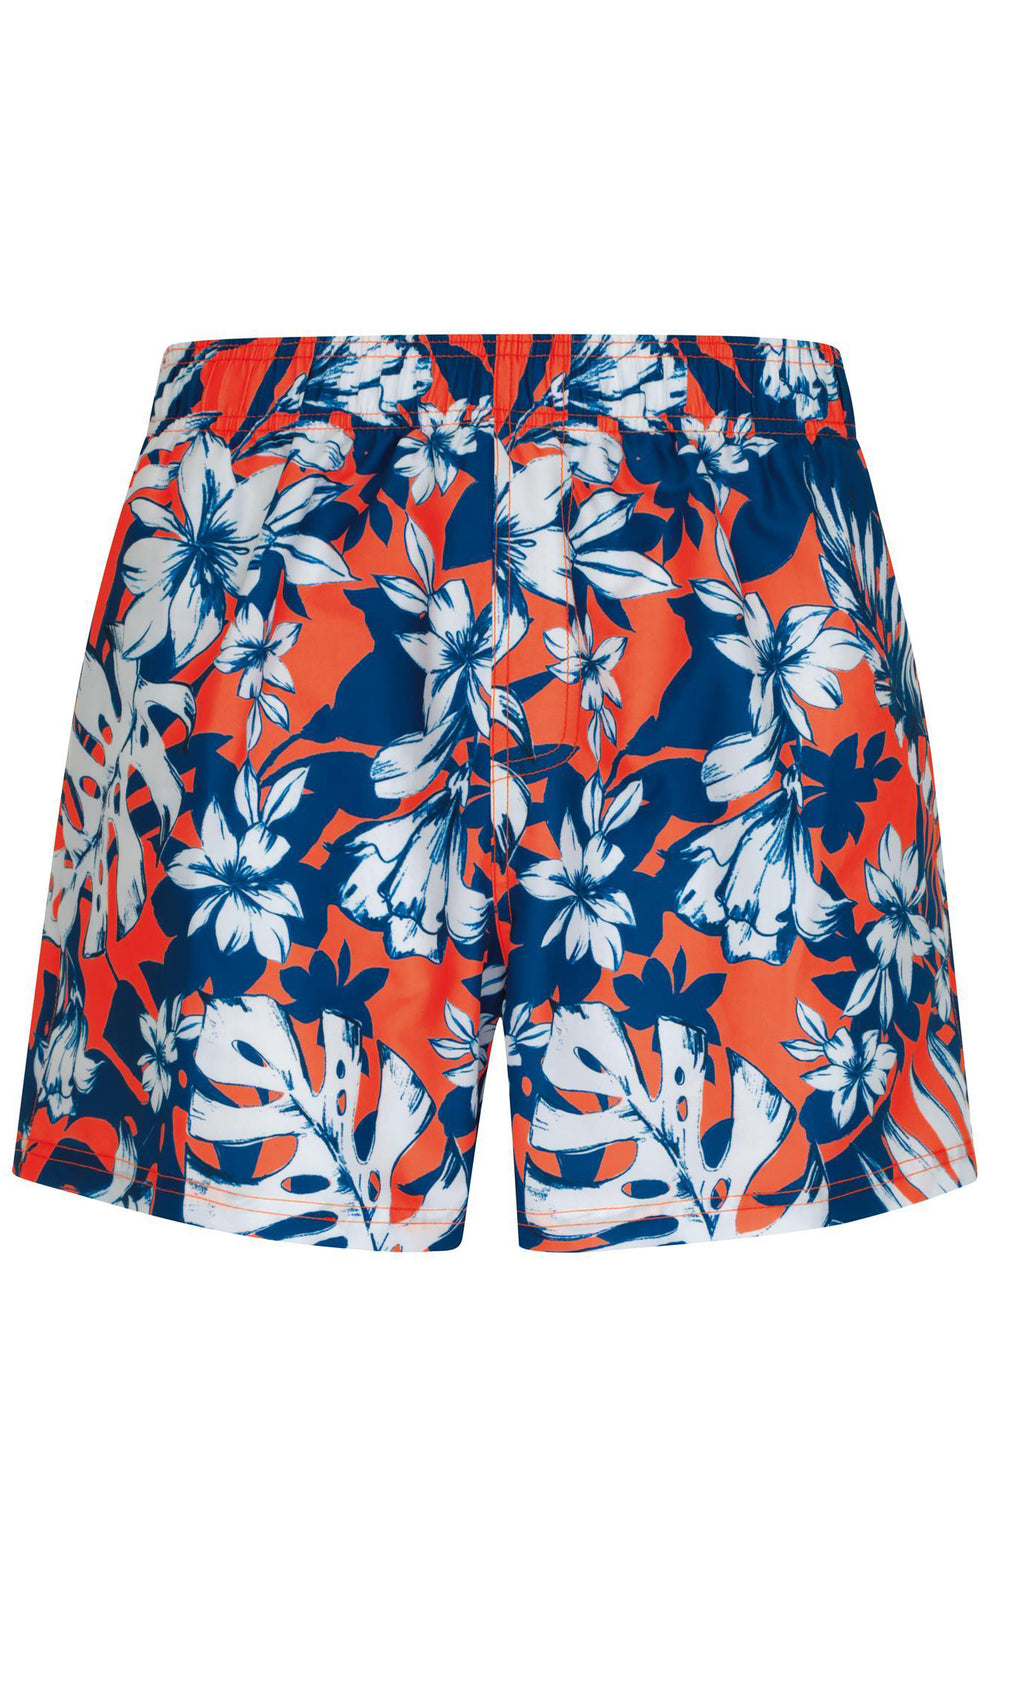 Sport Hibiscus Short, More Colours, Special Order S - 3XL